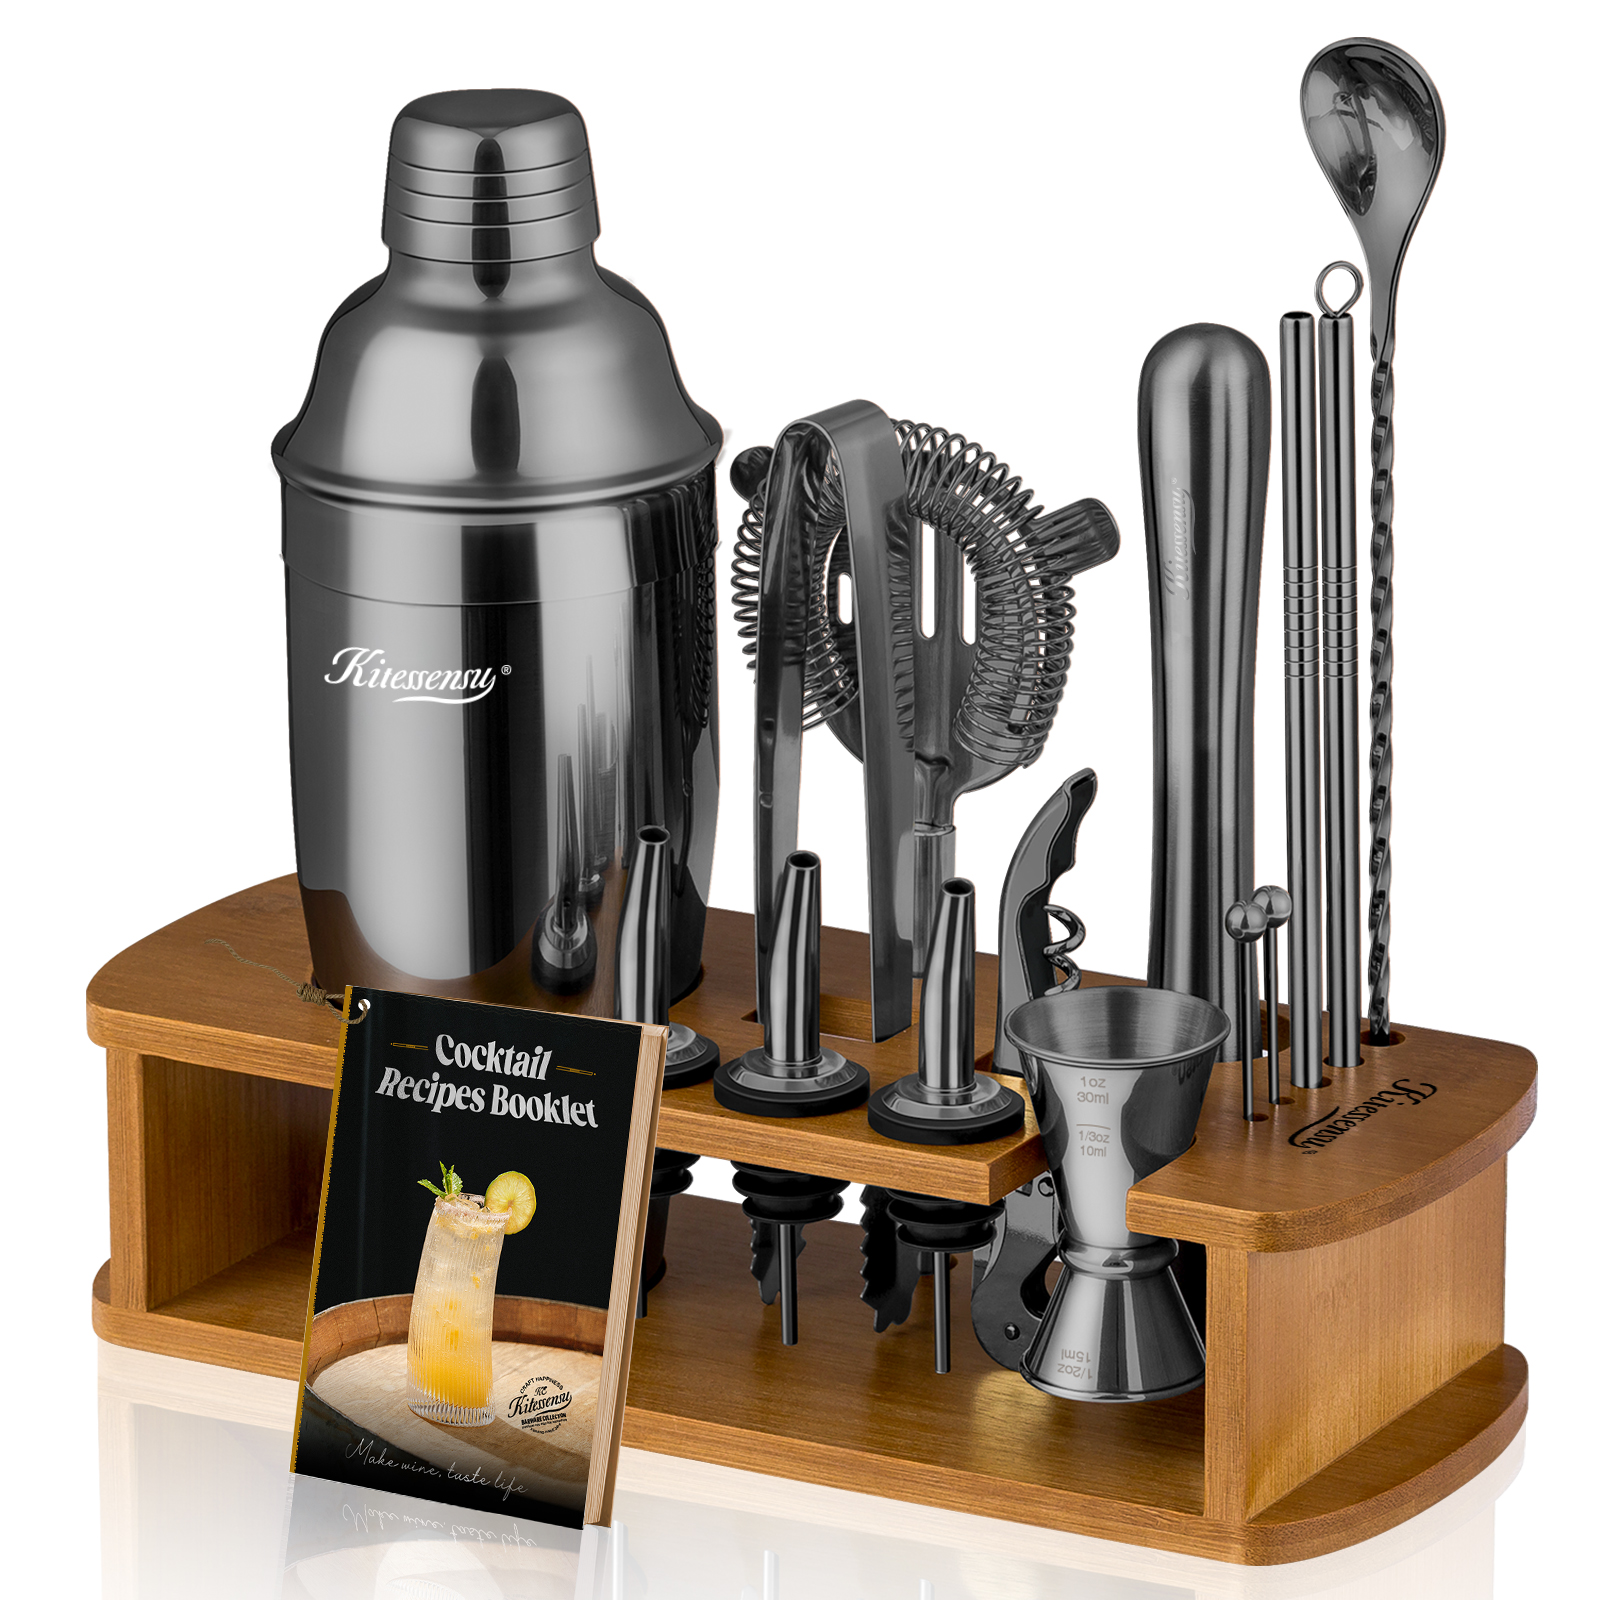 KITESSENSU Bartender Kit, 15-Piece Cocktail Shaker Set with Stand, Drink Mixer Set, Bar Set with All Essential Bar Accessory Tools |Black - image 1 of 8